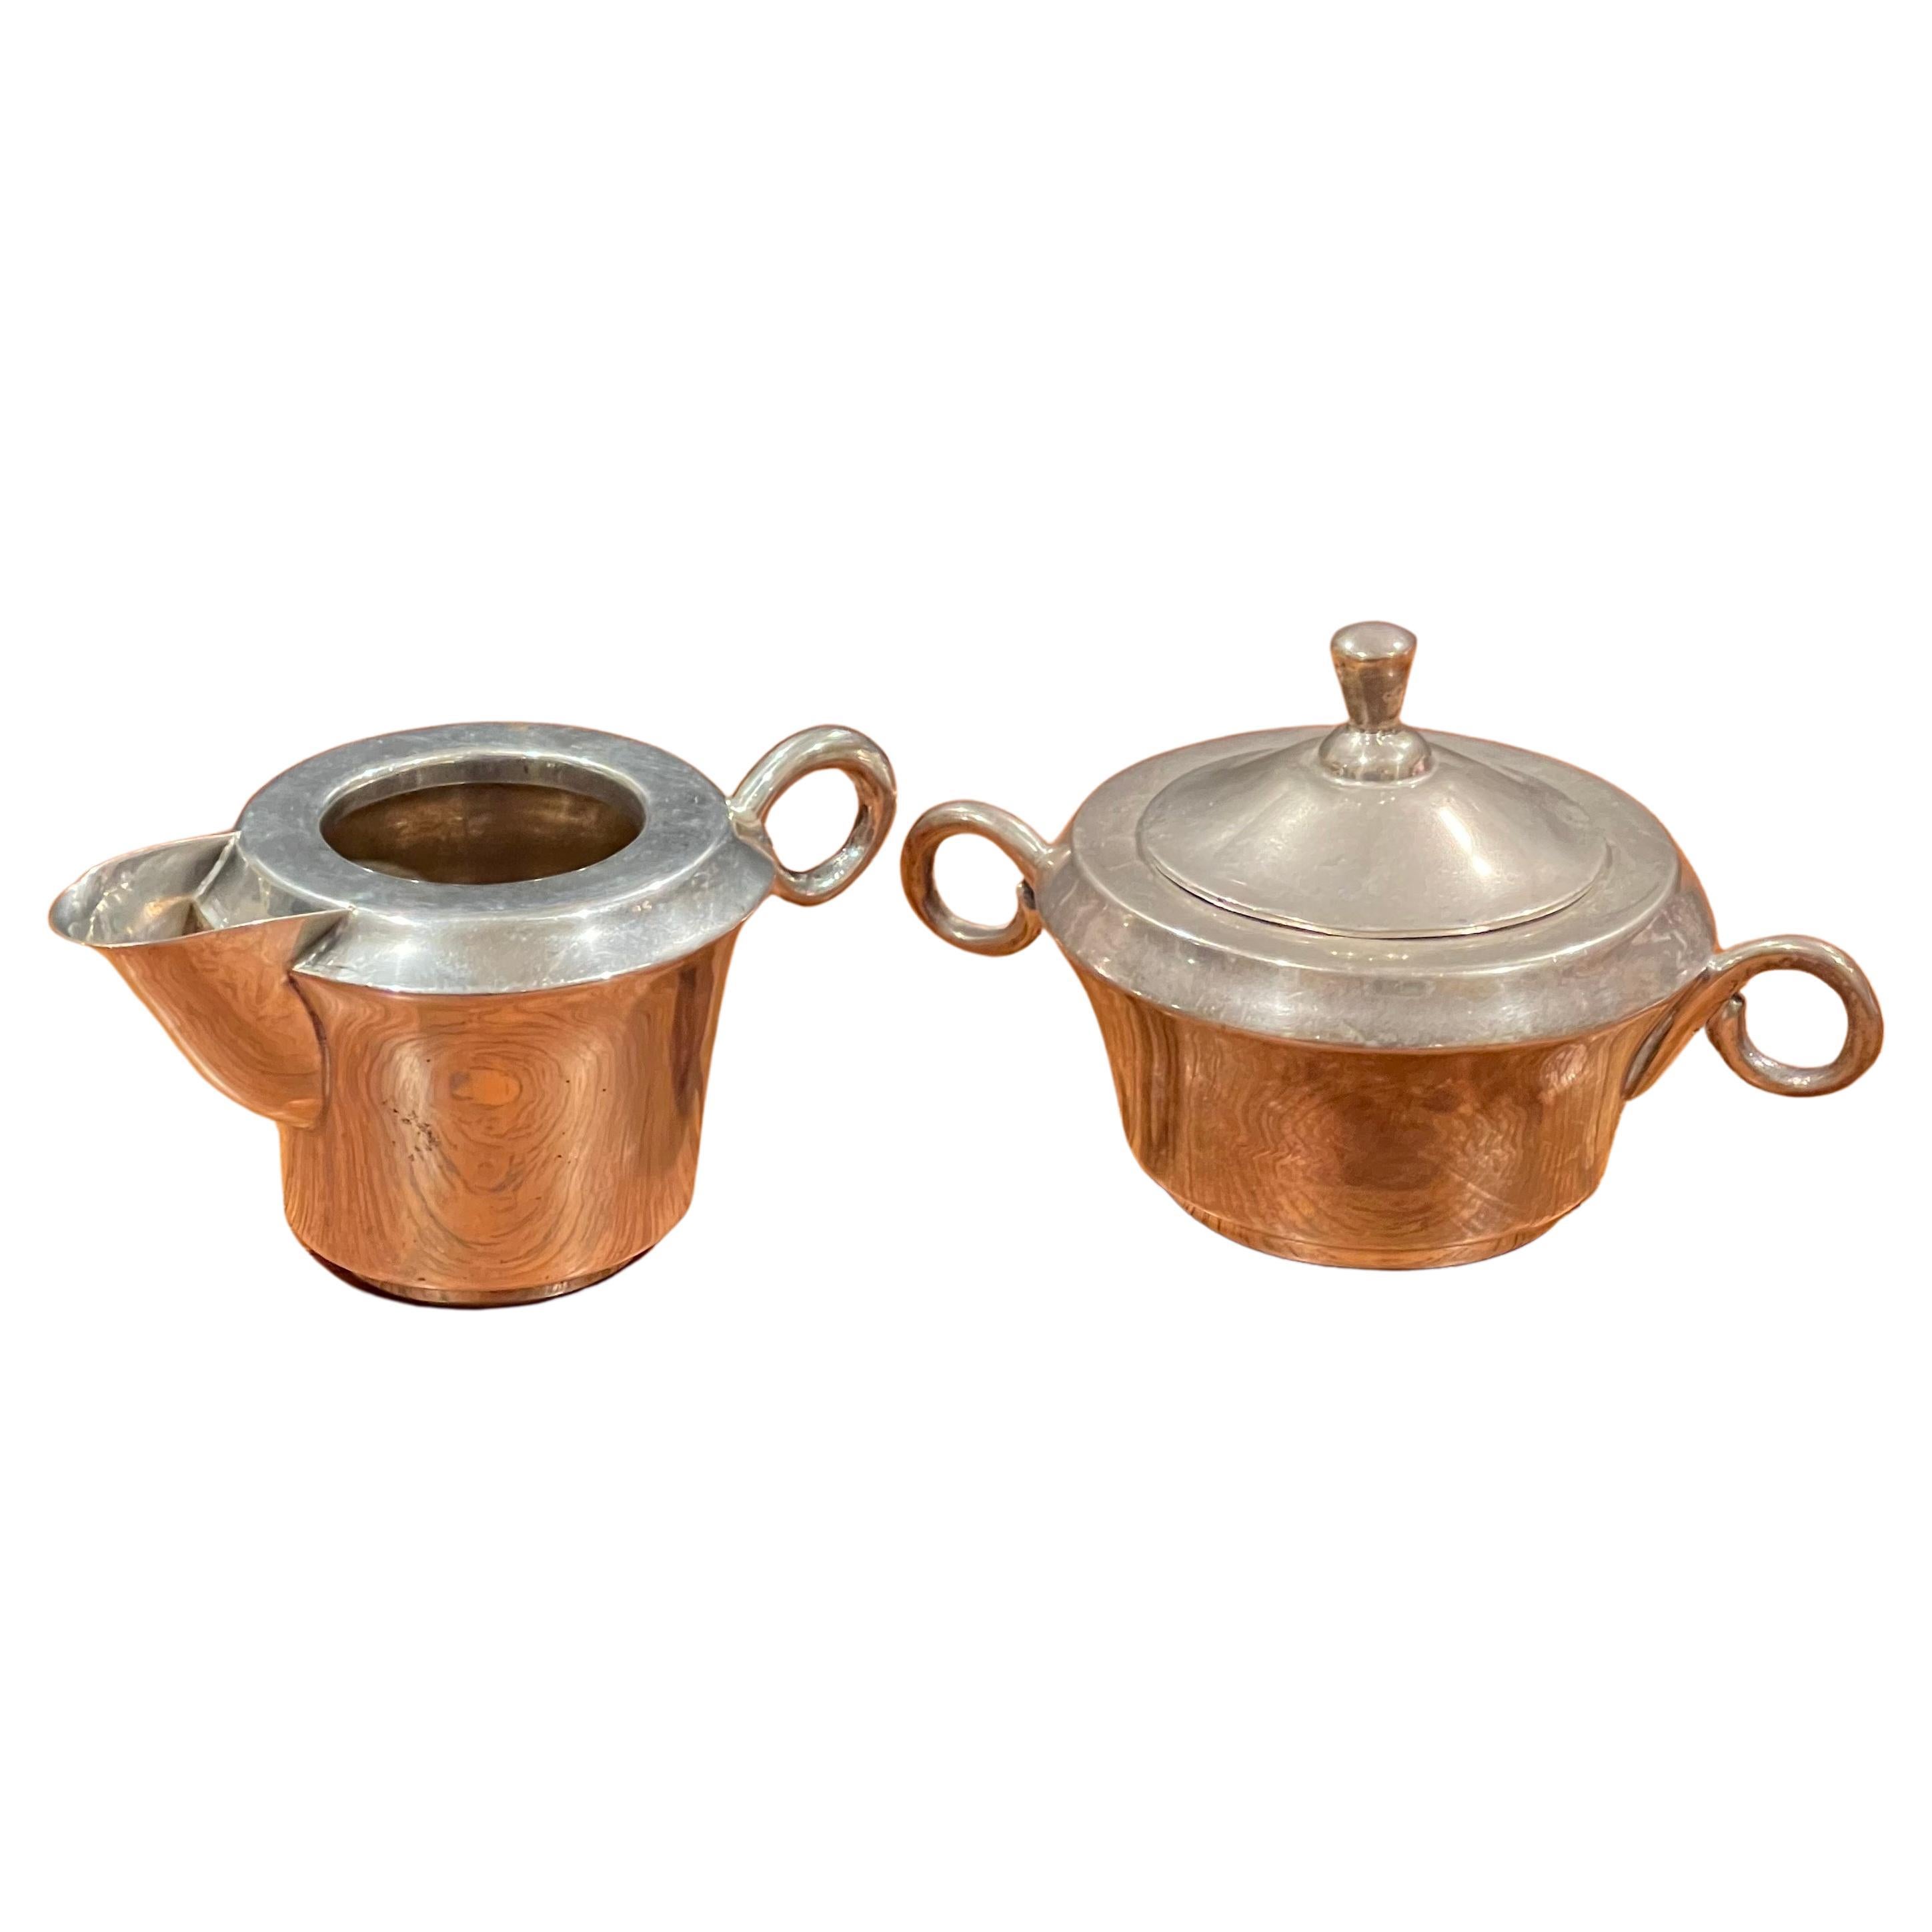 Striking minimalist Mexican sterling silver cream and sugar set by Anfer, circa 1960s. The highly crafted two-piece set is in very good vintage condition and measures 5.5